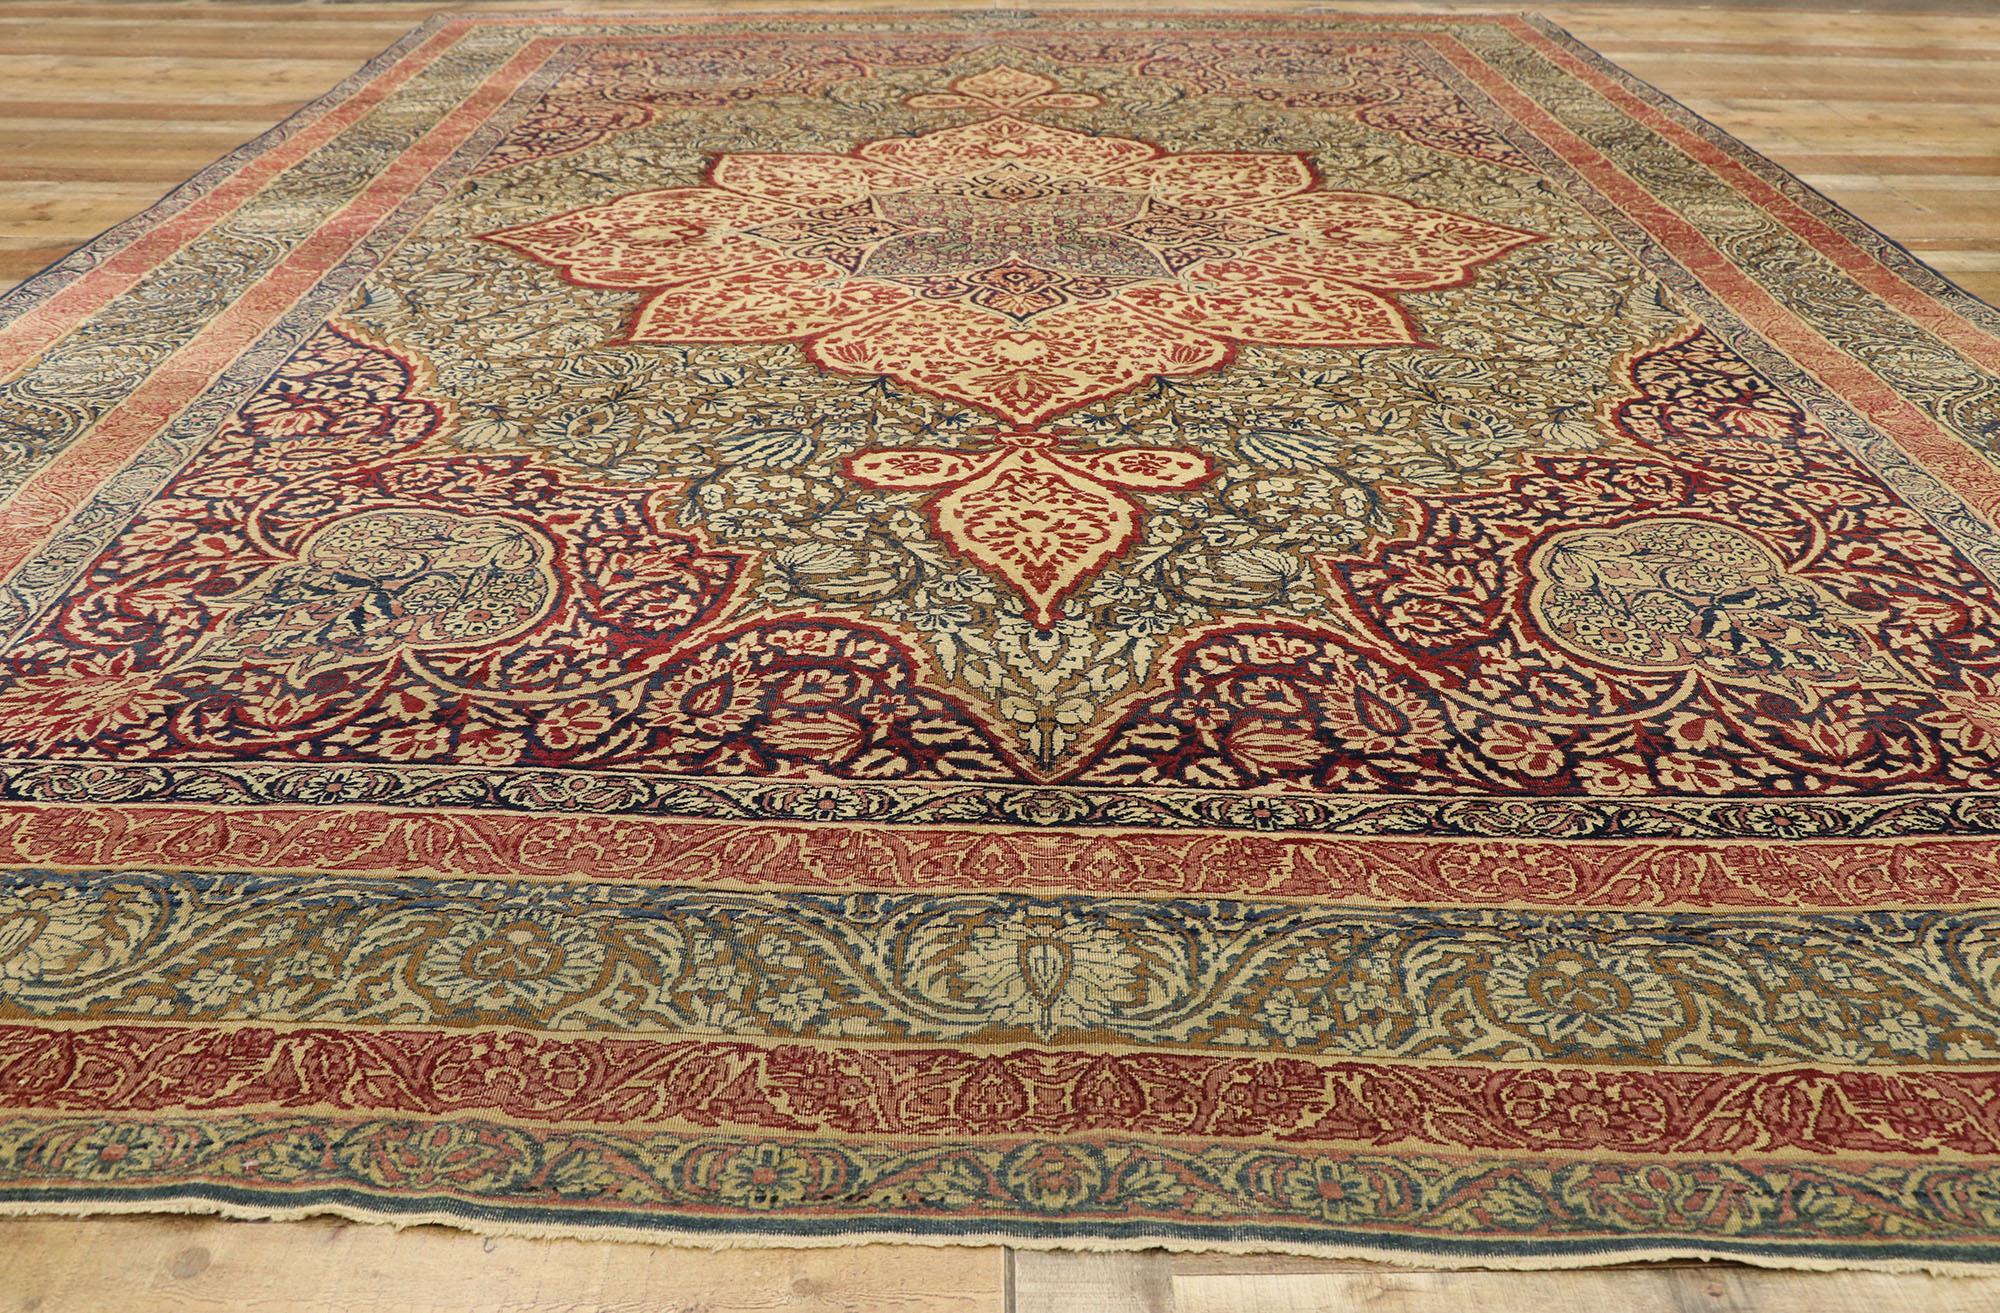 19th Century Antique Persian Kermanshah Rug with William Morris Arts & Crafts Style For Sale